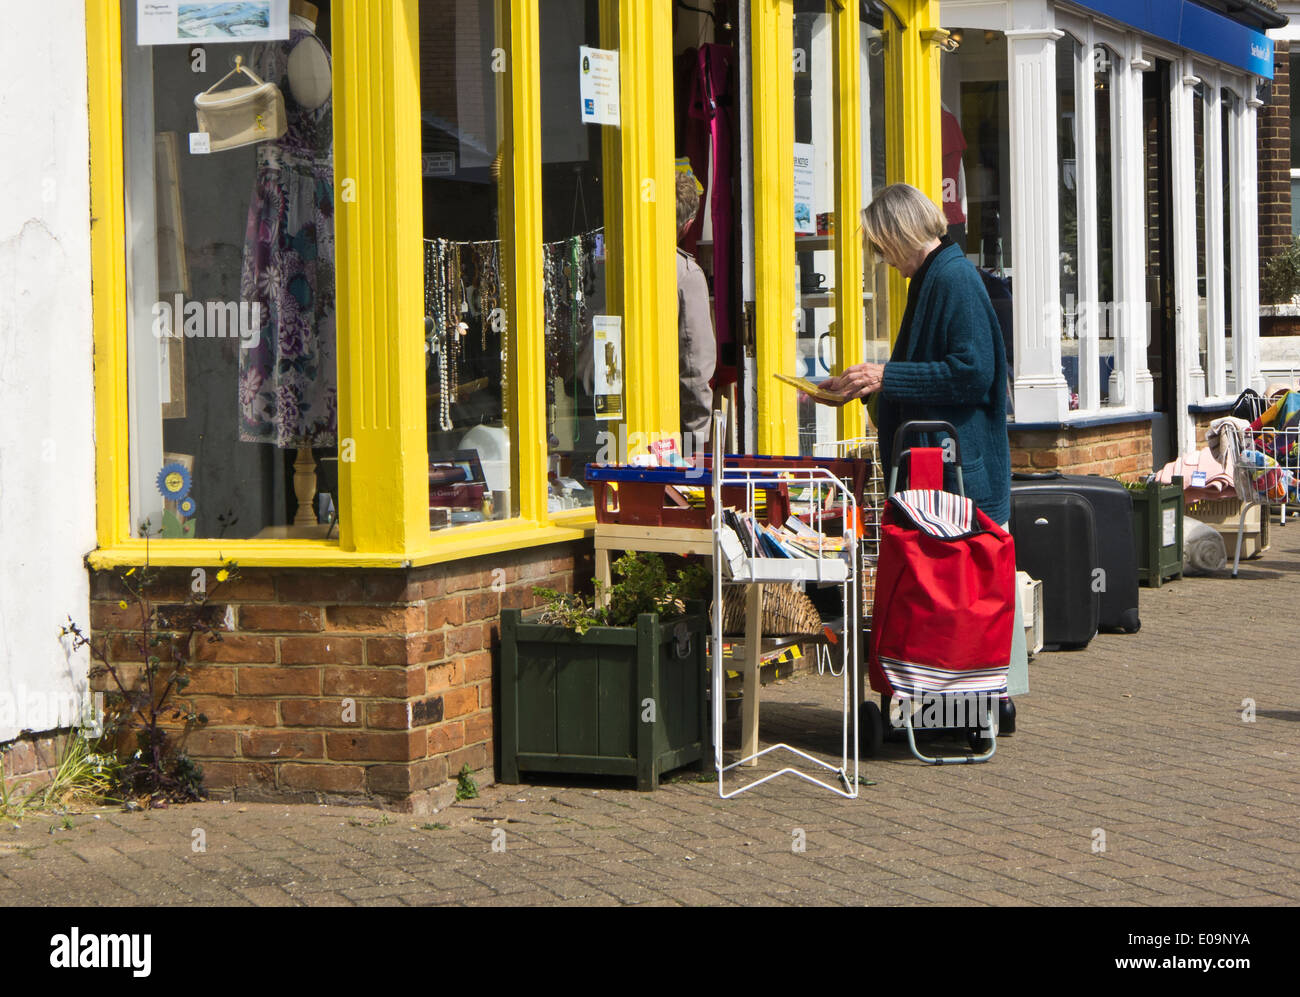 A woman browsing at a charity shop. Stock Photo